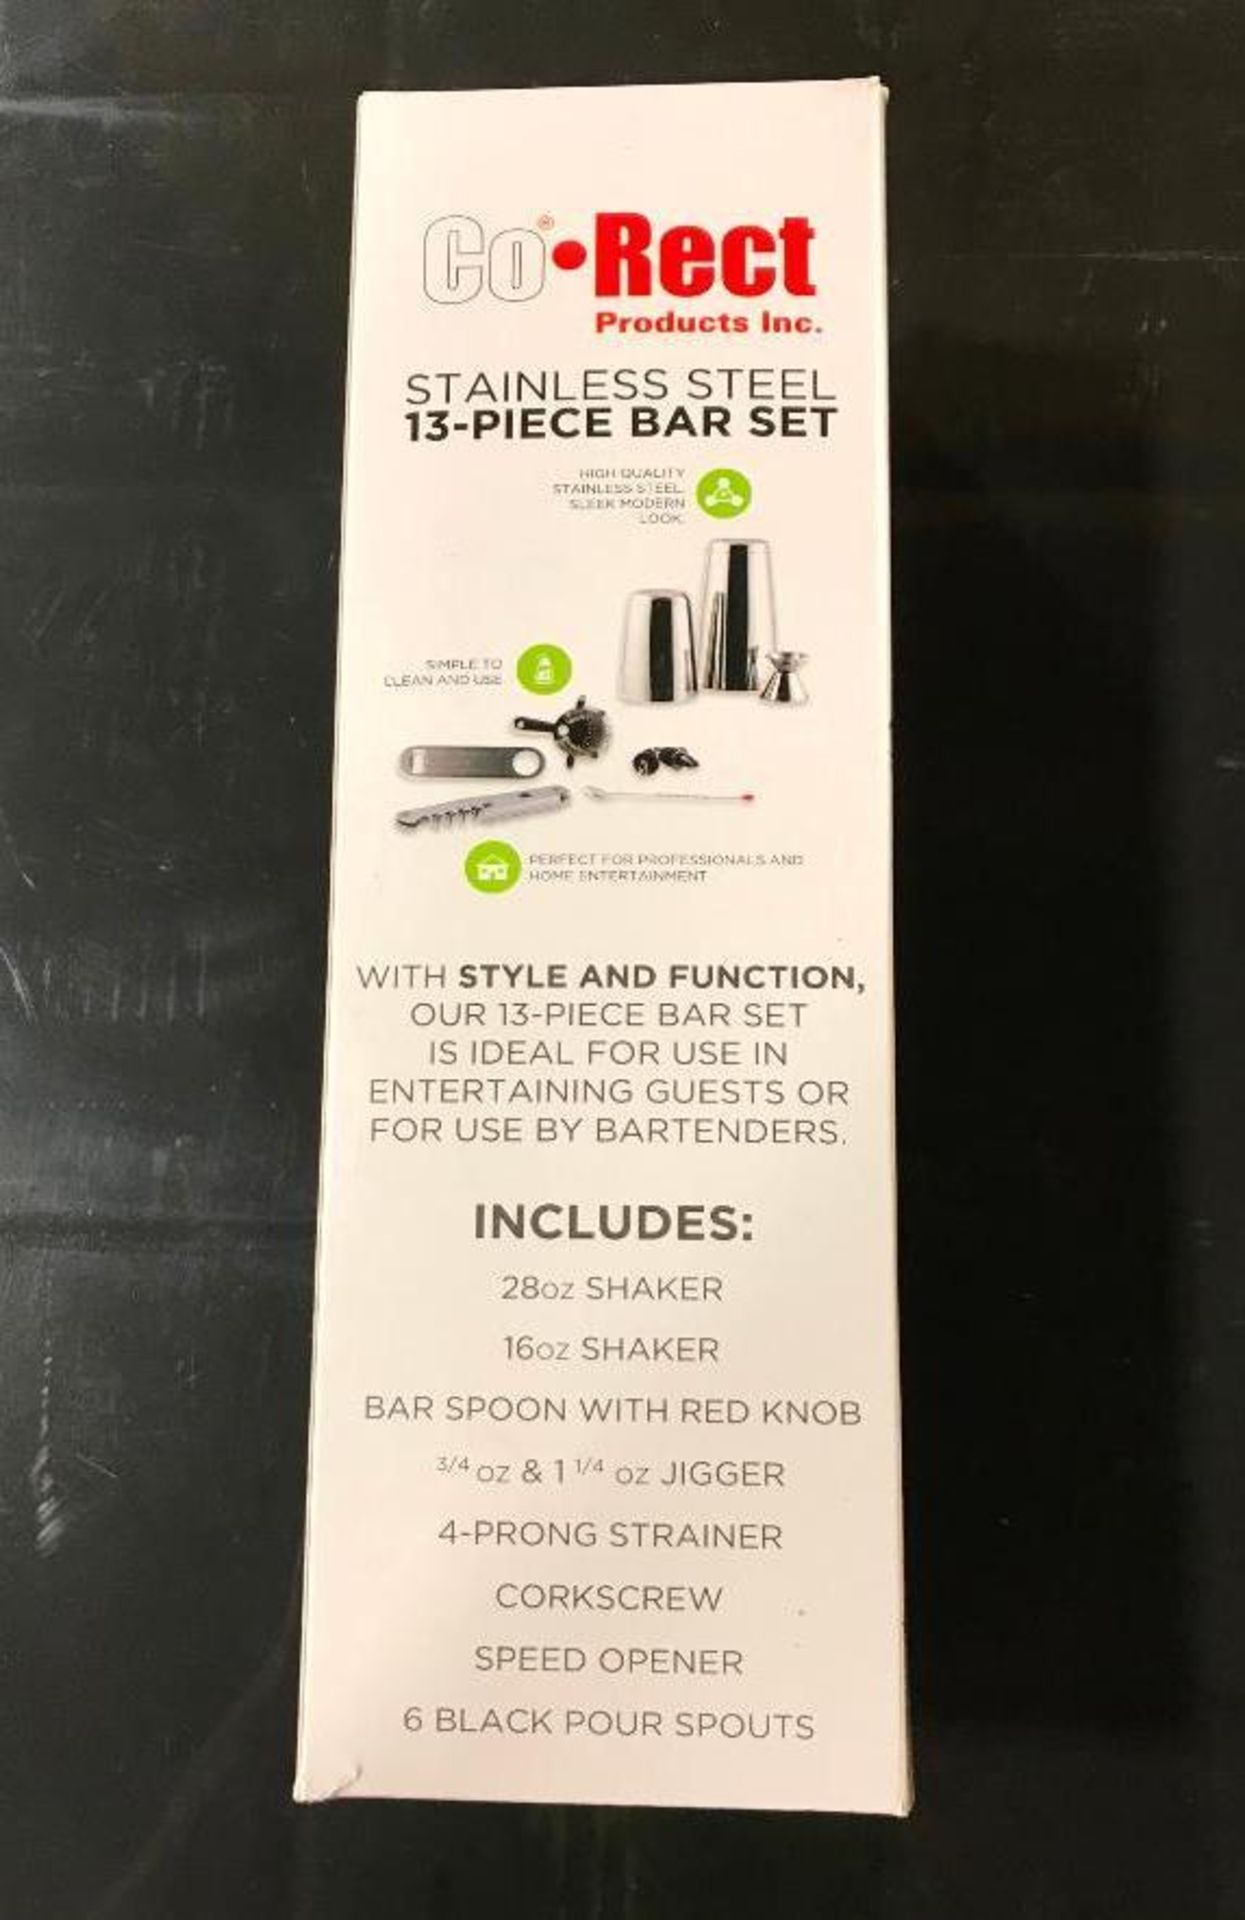 13 PIECE STAINLESS STEEL HOME BAR STARTER SET, CO-RECT BS207 - NEW - Image 3 of 6